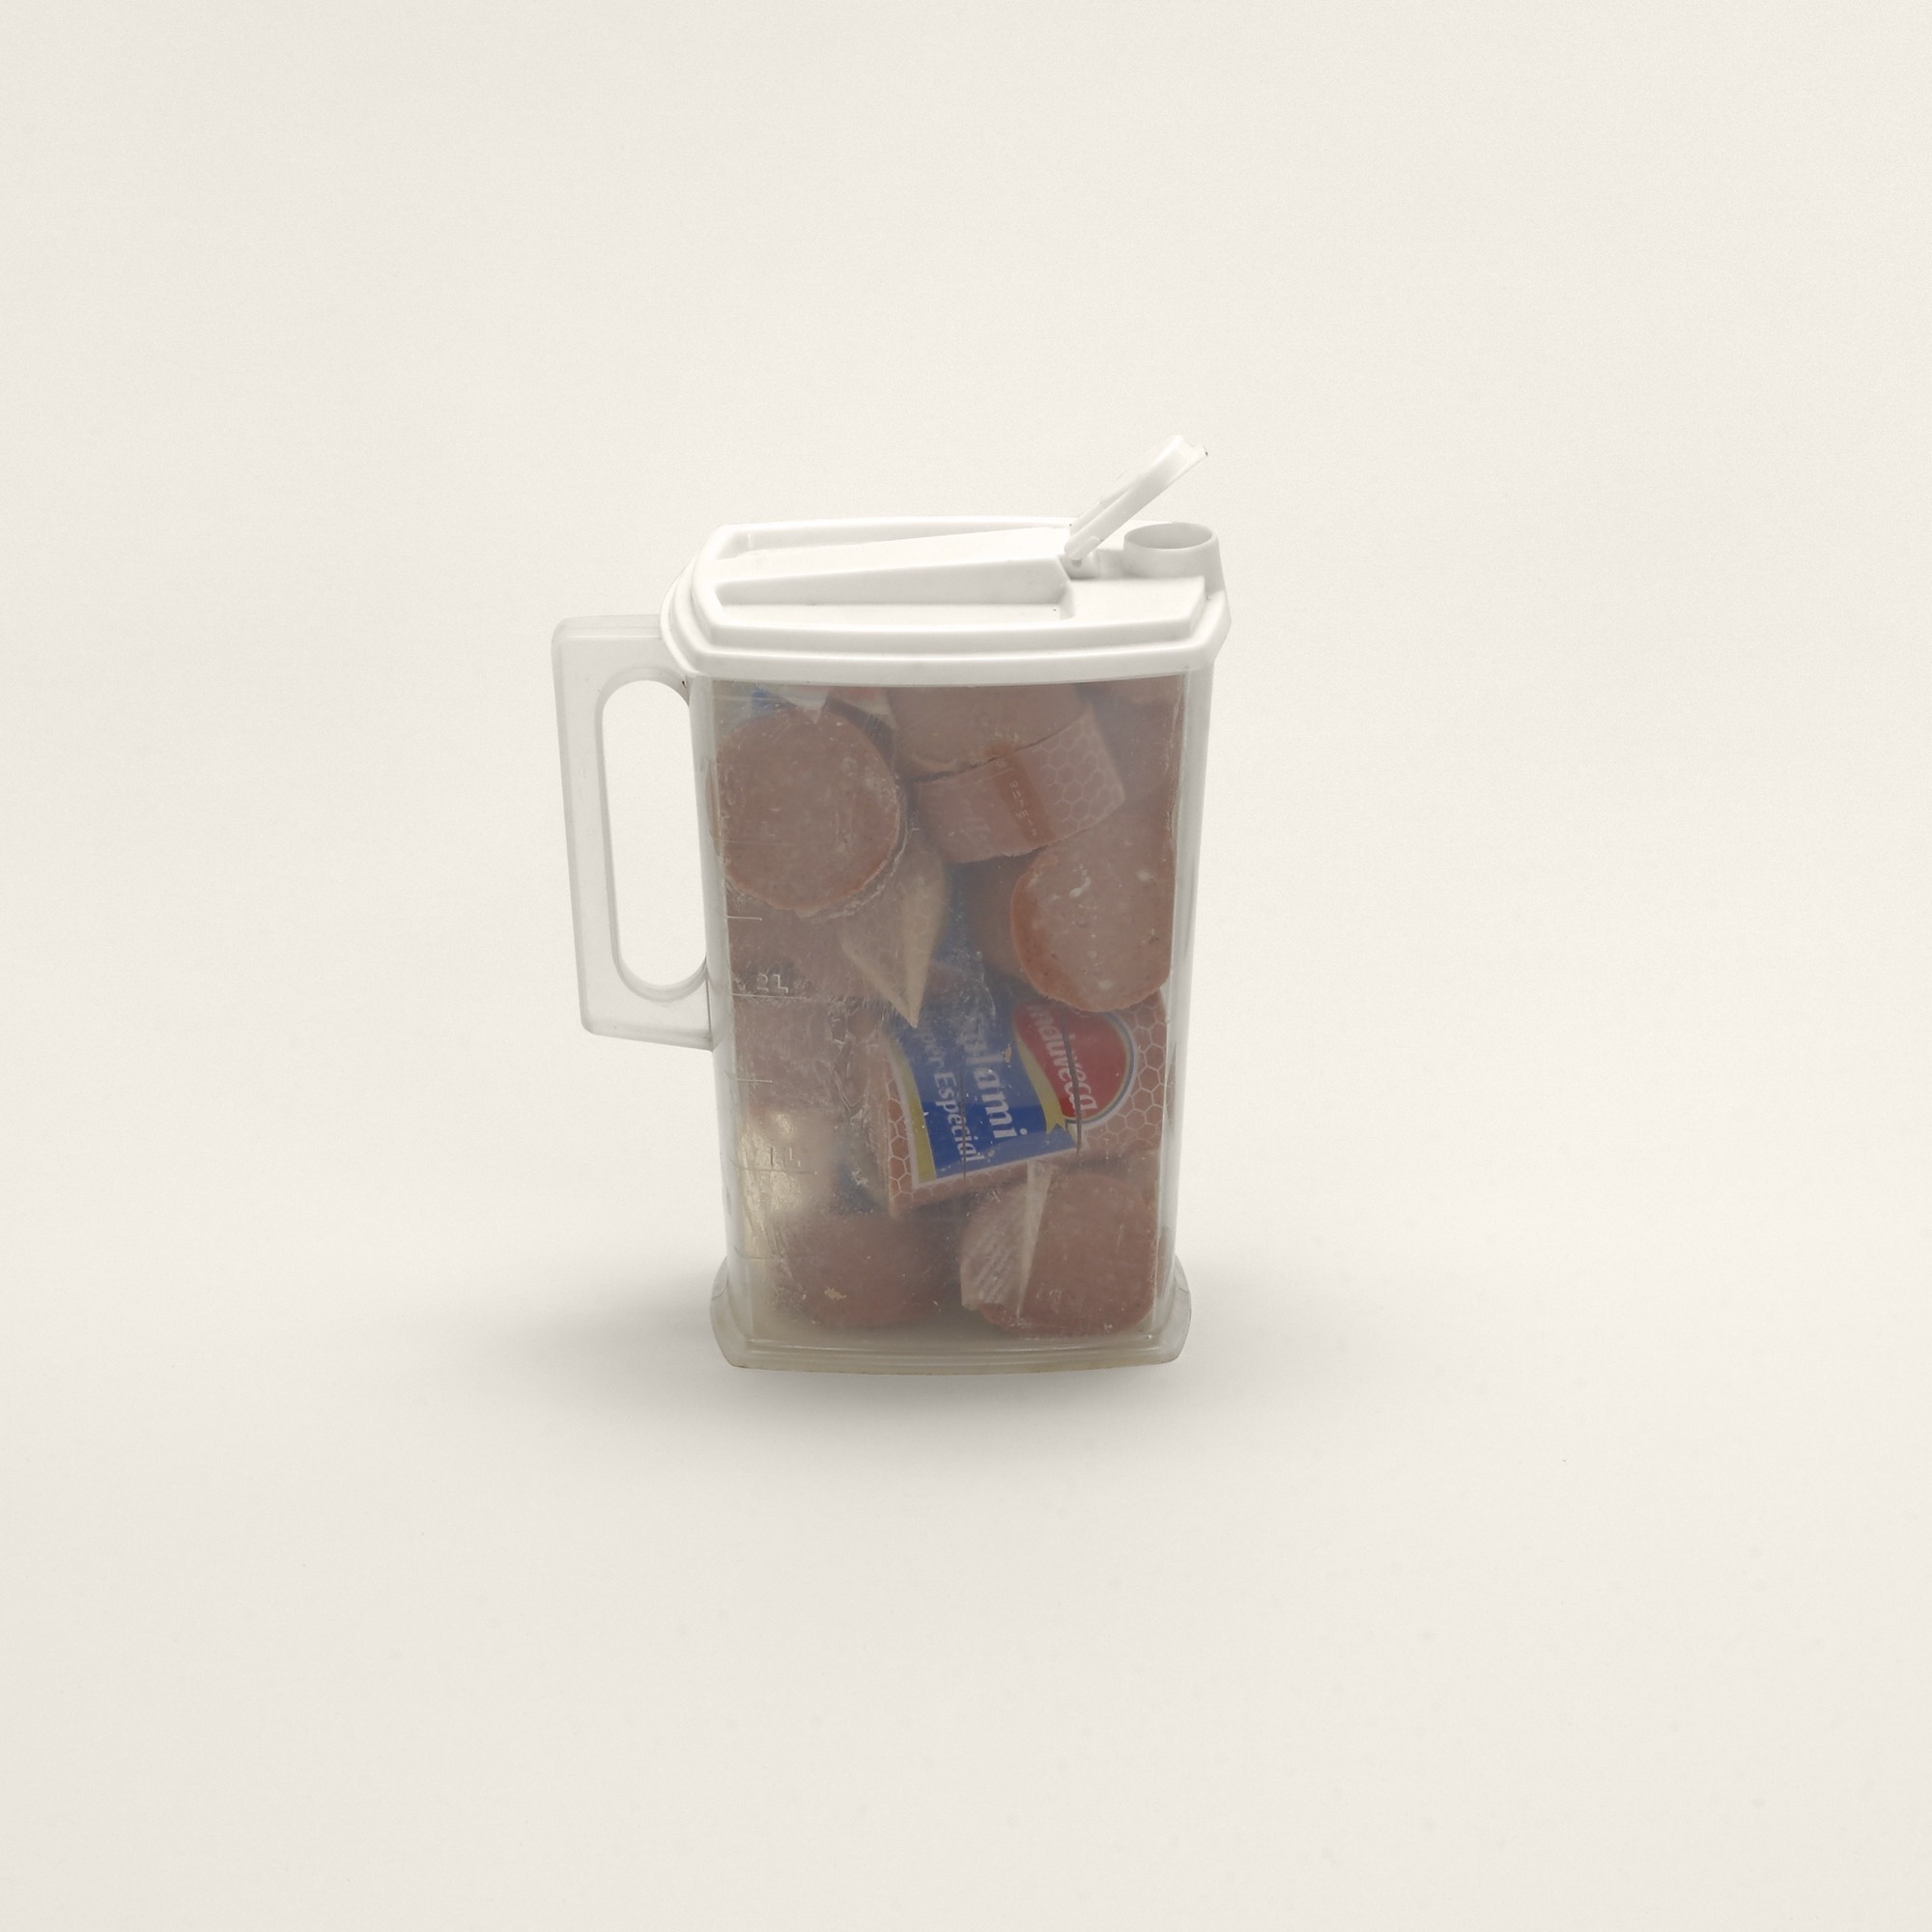 “Plastic pitcher of salami, Eastern Europe (9CFR.94) (prohibited)” (Detail) Sausages (Prohibited)<em>, Contraband</em>, 2010 , Archival inkjet print, 6 1⁄4 x 6 1⁄4 inches (15.9 x 15.9 cm) © Taryn Simon. Courtesy Gagosian and Anna Schwartz Gallery.